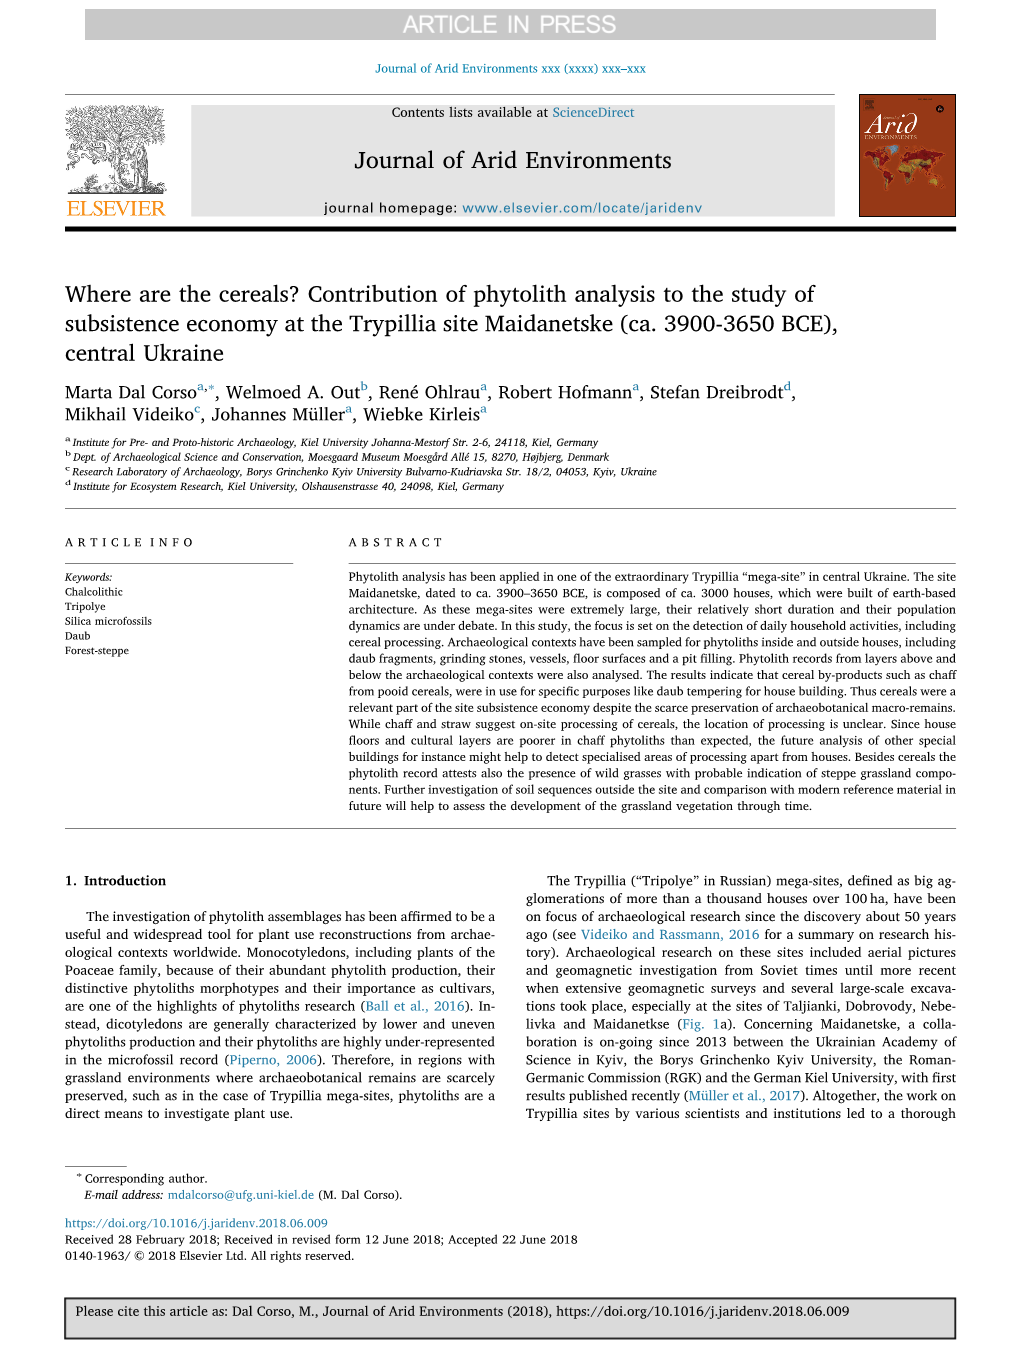 Contribution of Phytolith Analysis to the Study of Subsistence Economy at the Trypillia Site Maidanetske (Ca